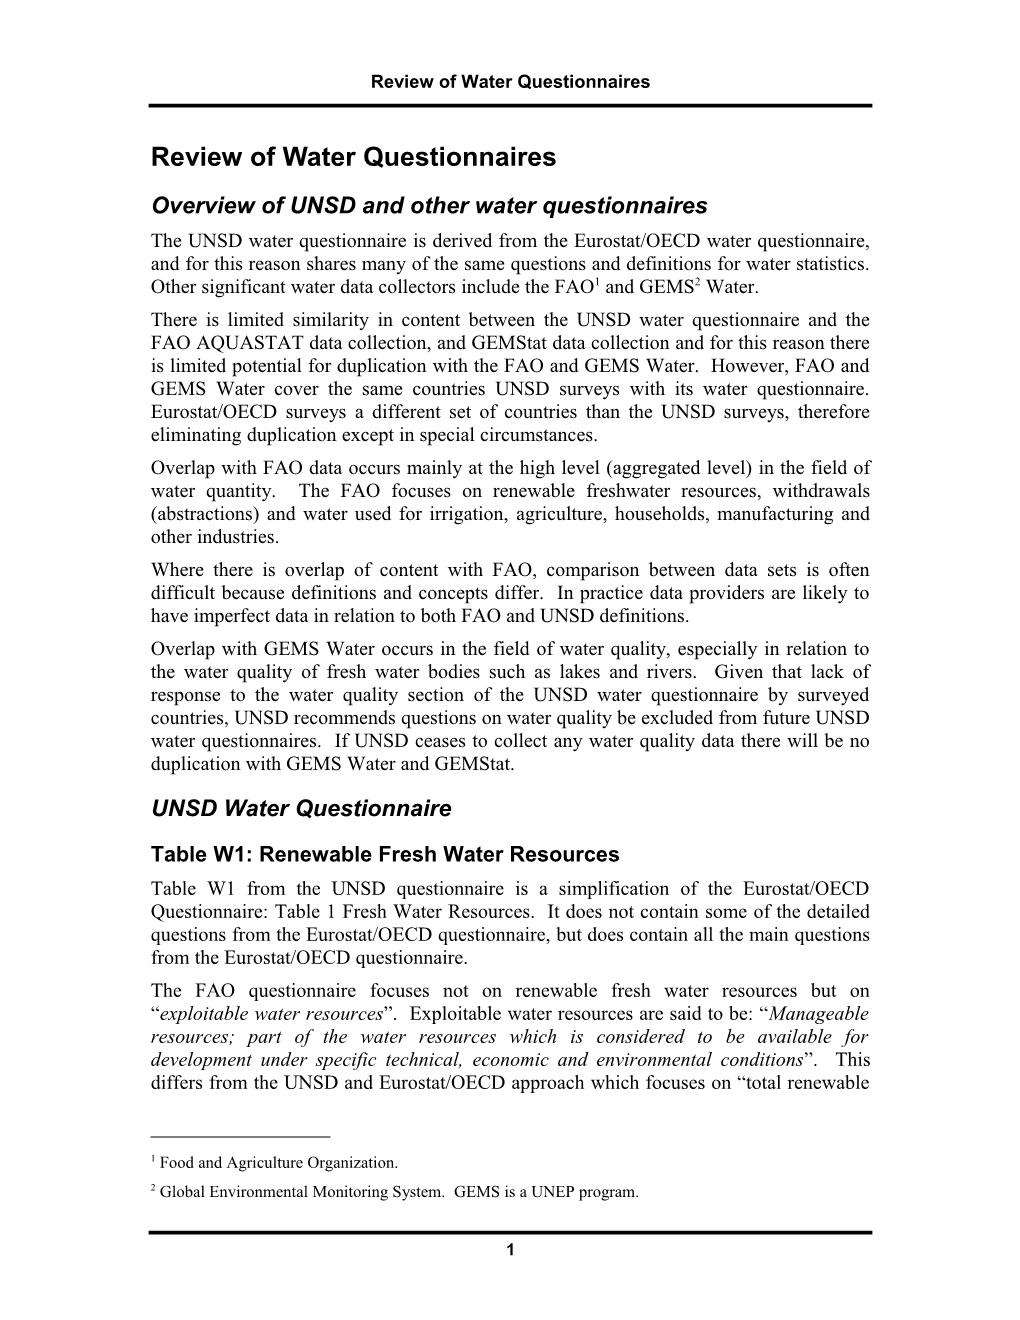 Overview of UNSD and Other Water Questionnaires